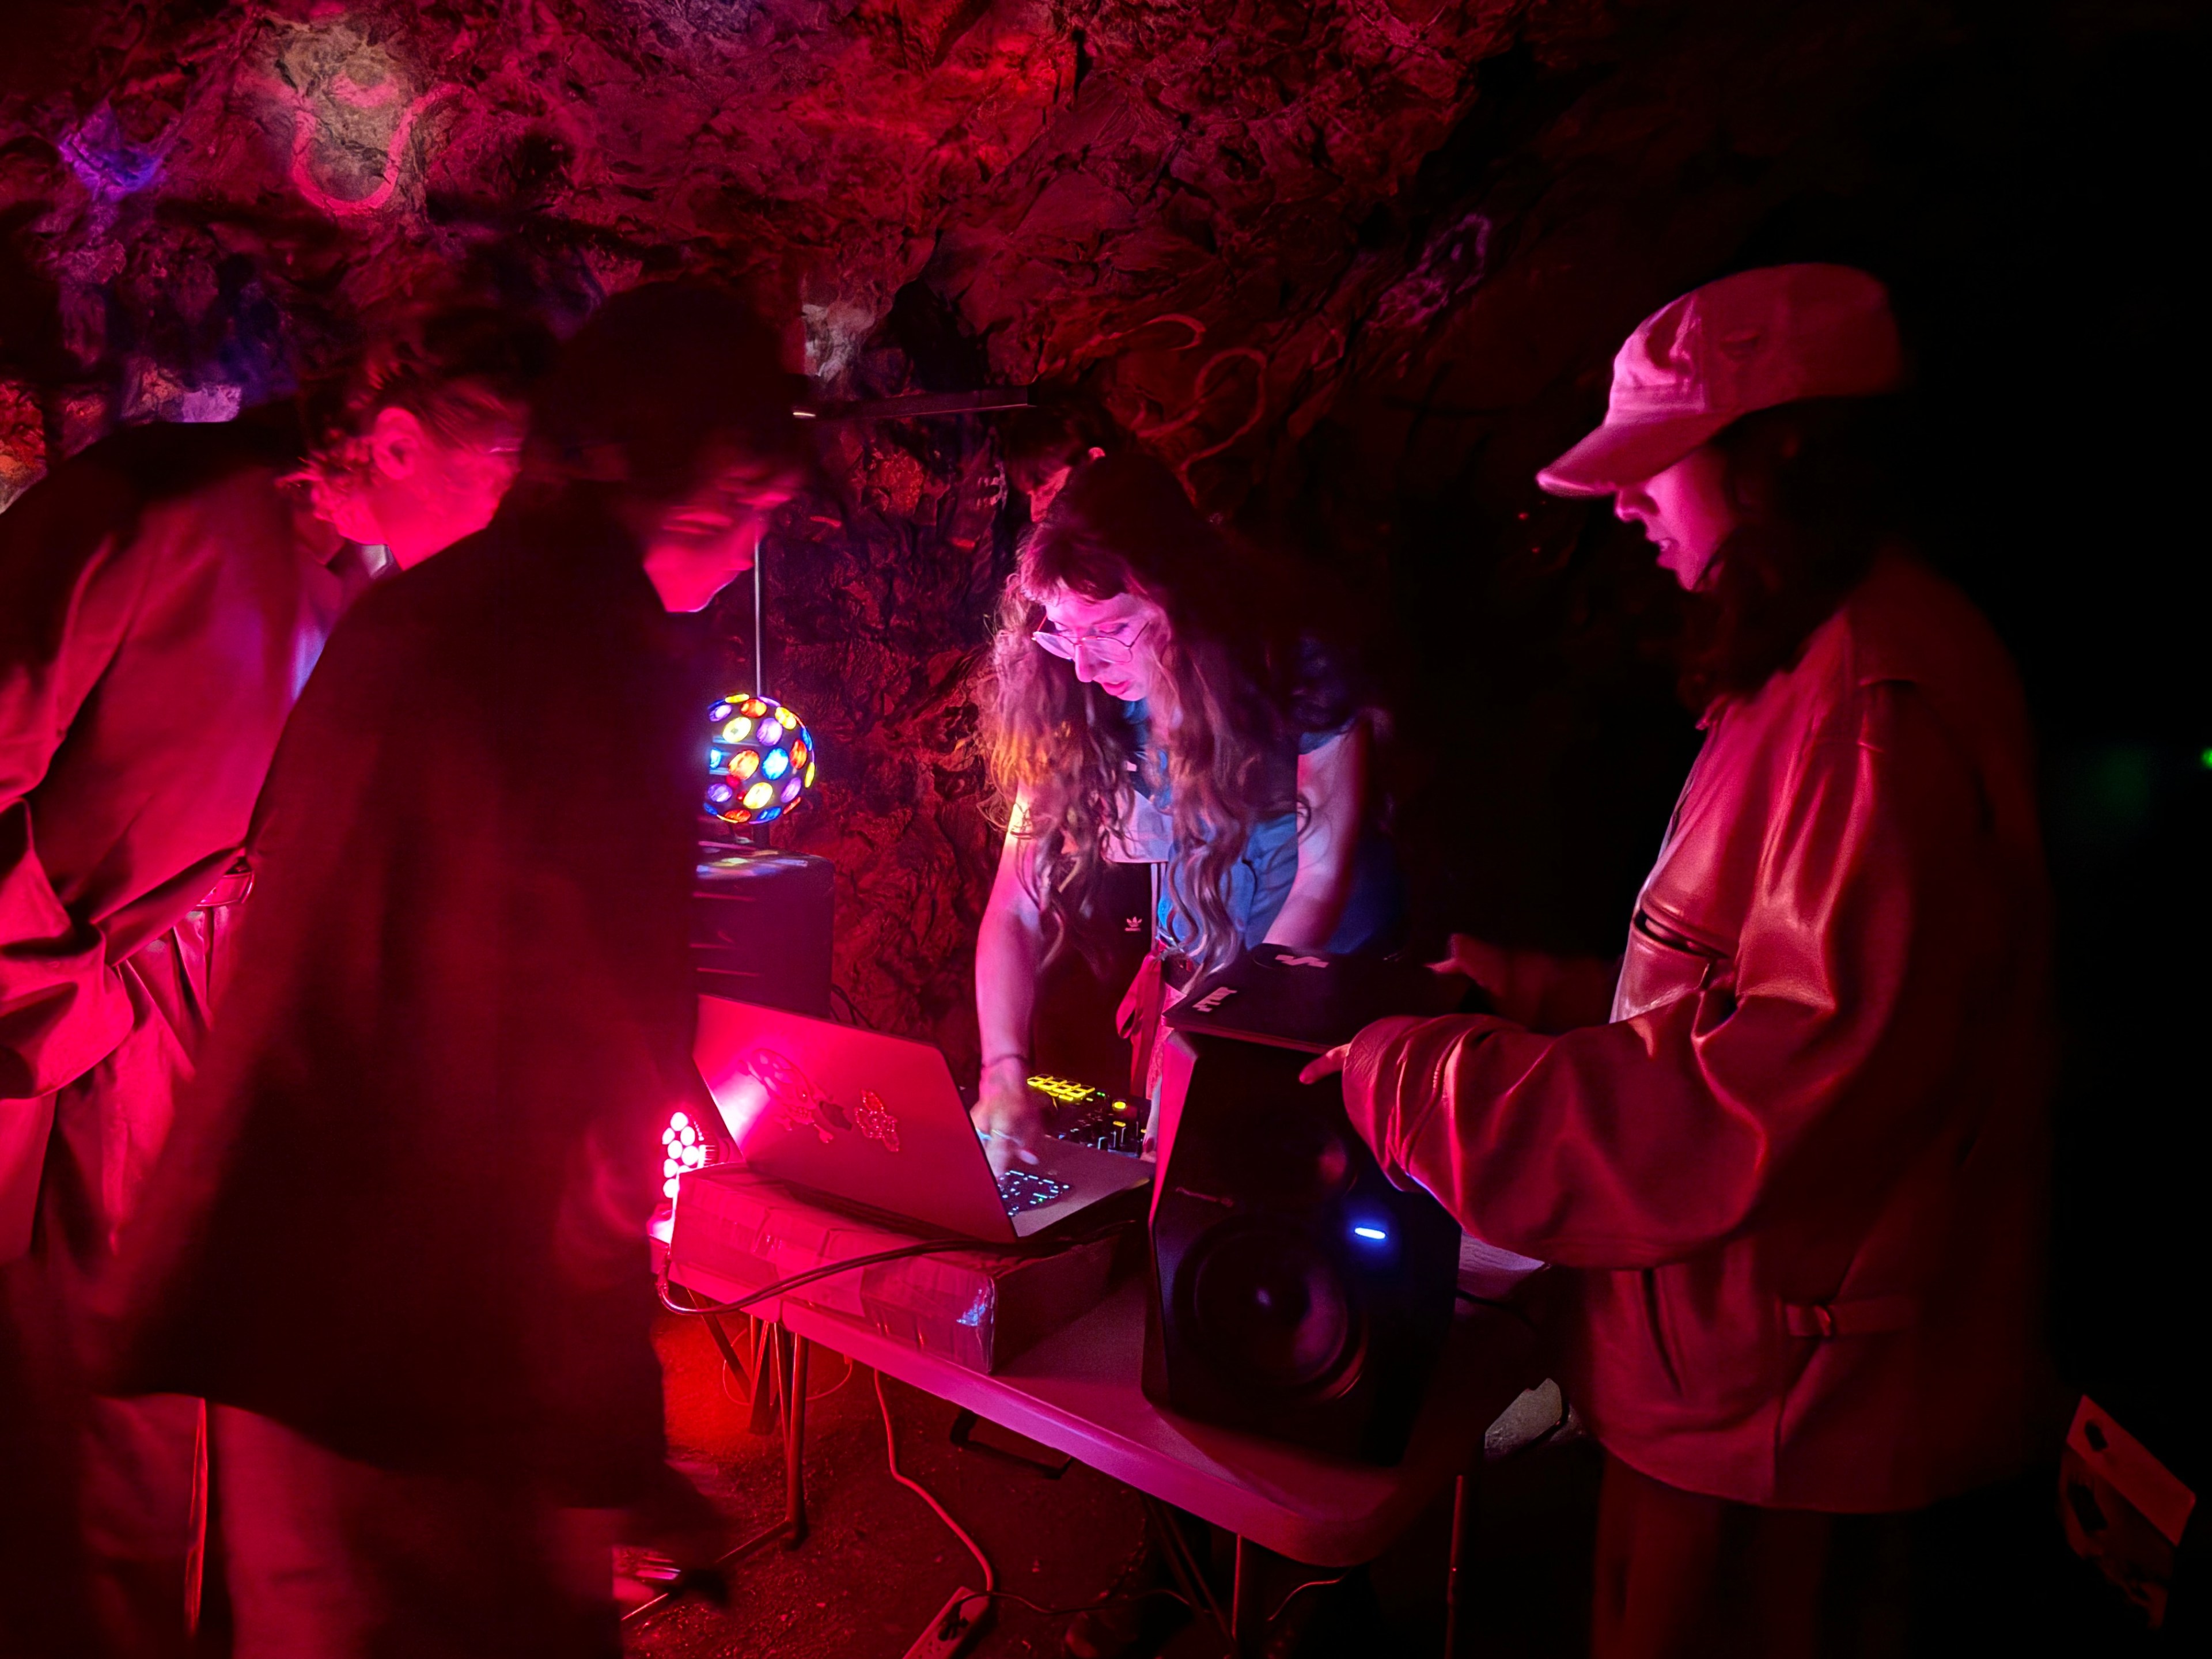 A dimly lit cave features four people gathered around electronic equipment on a table, illuminated by colorful lights, including a disco ball and a glowing red light.